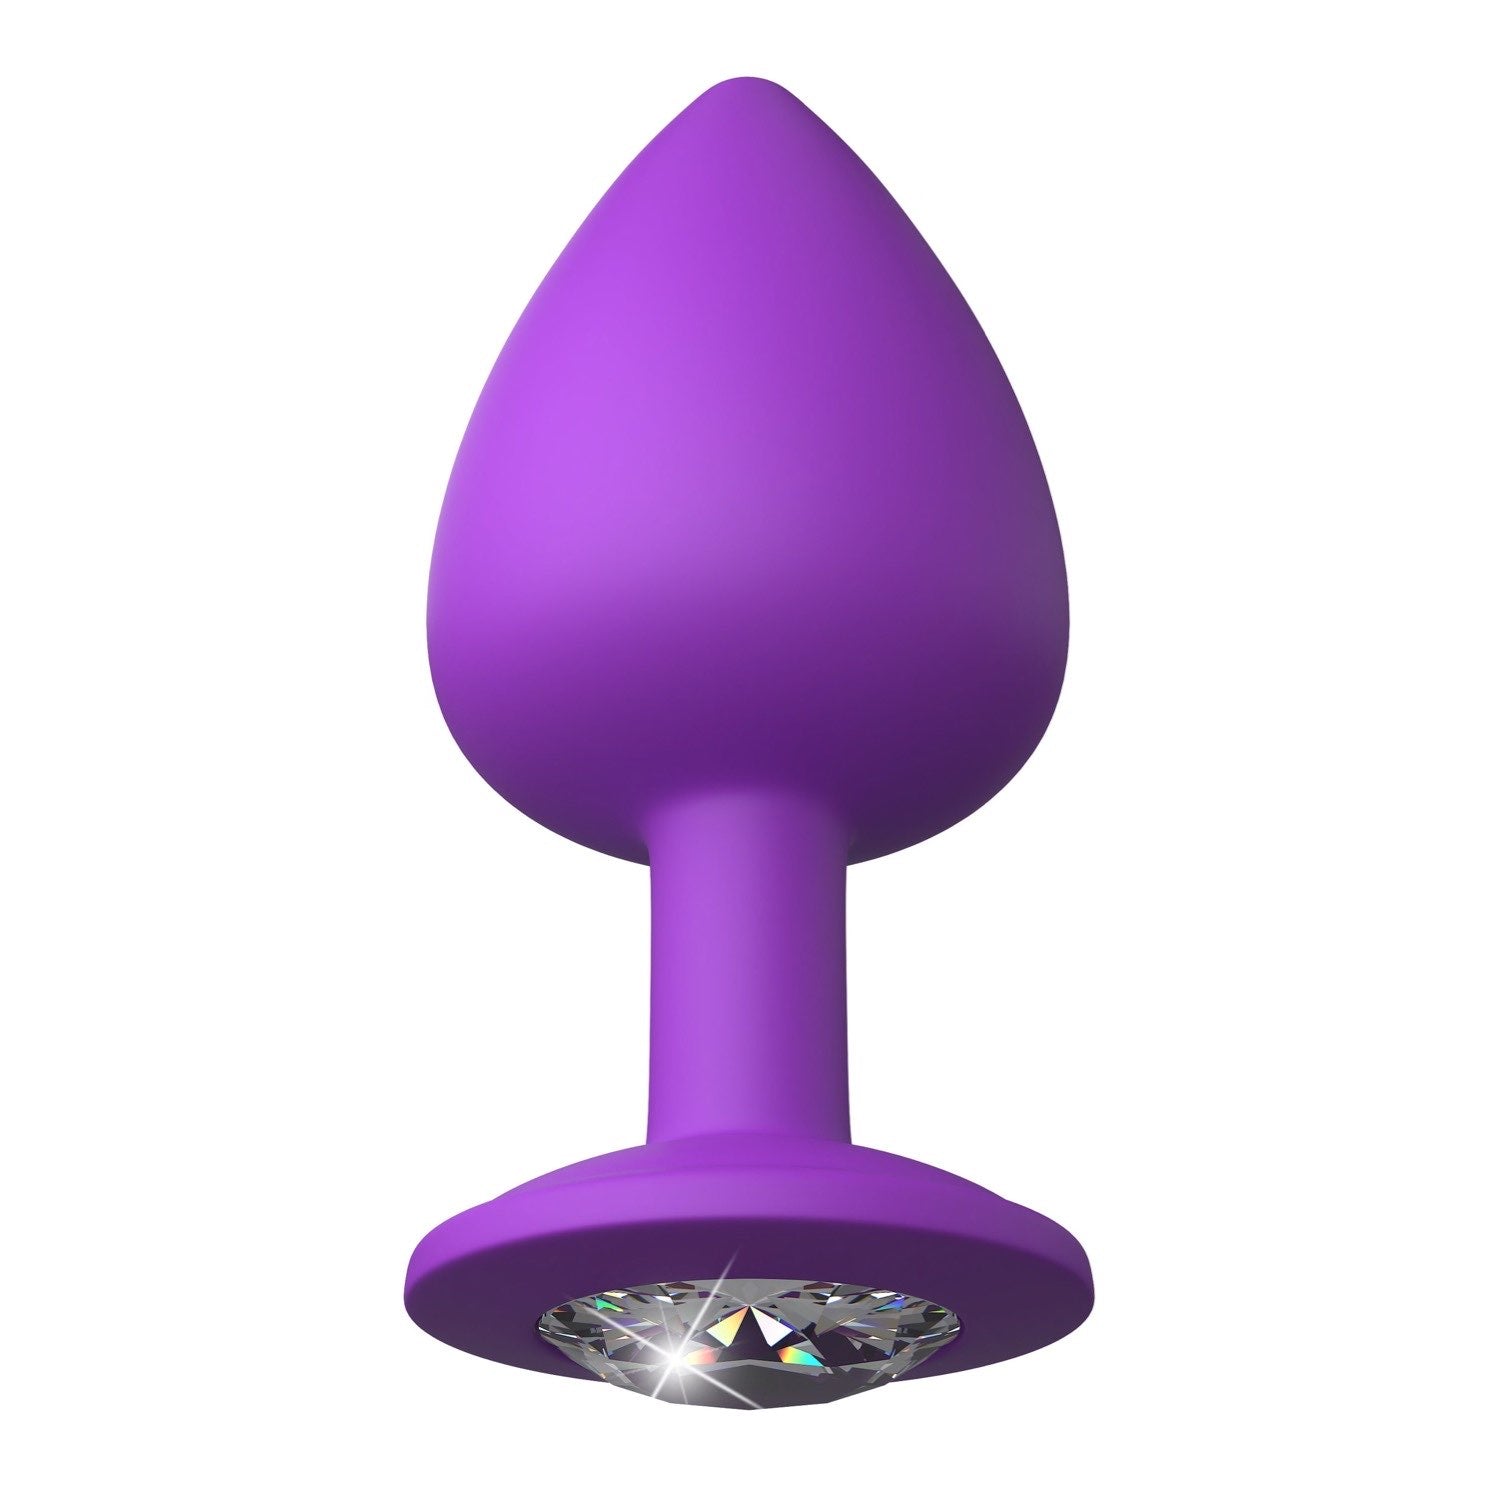 Fantasy For Her Little Gem Large Plug - Purple 9.6 cm Butt Plug with Jewel Base by Pipedream